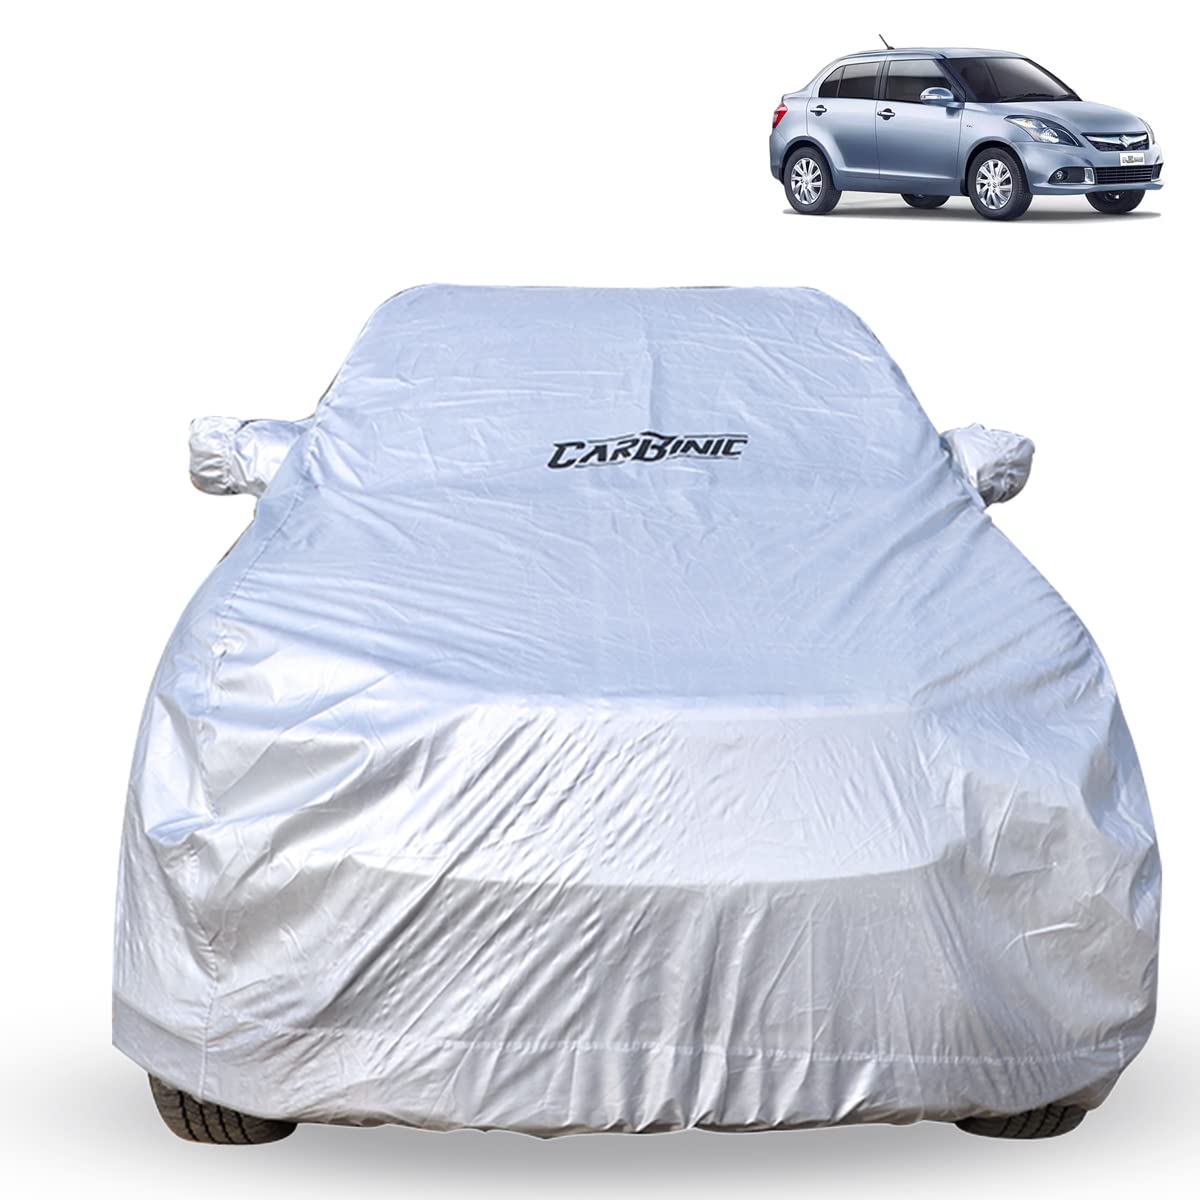 CARBINIC Car Body Cover for Maruti Swift Dzire 2017 | Water Resistant, UV Protection Car Cover | Scratchproof Body Shield | Dustproof All-Weather | Mirror Pocket & Antenna | Car Accessories, Silver